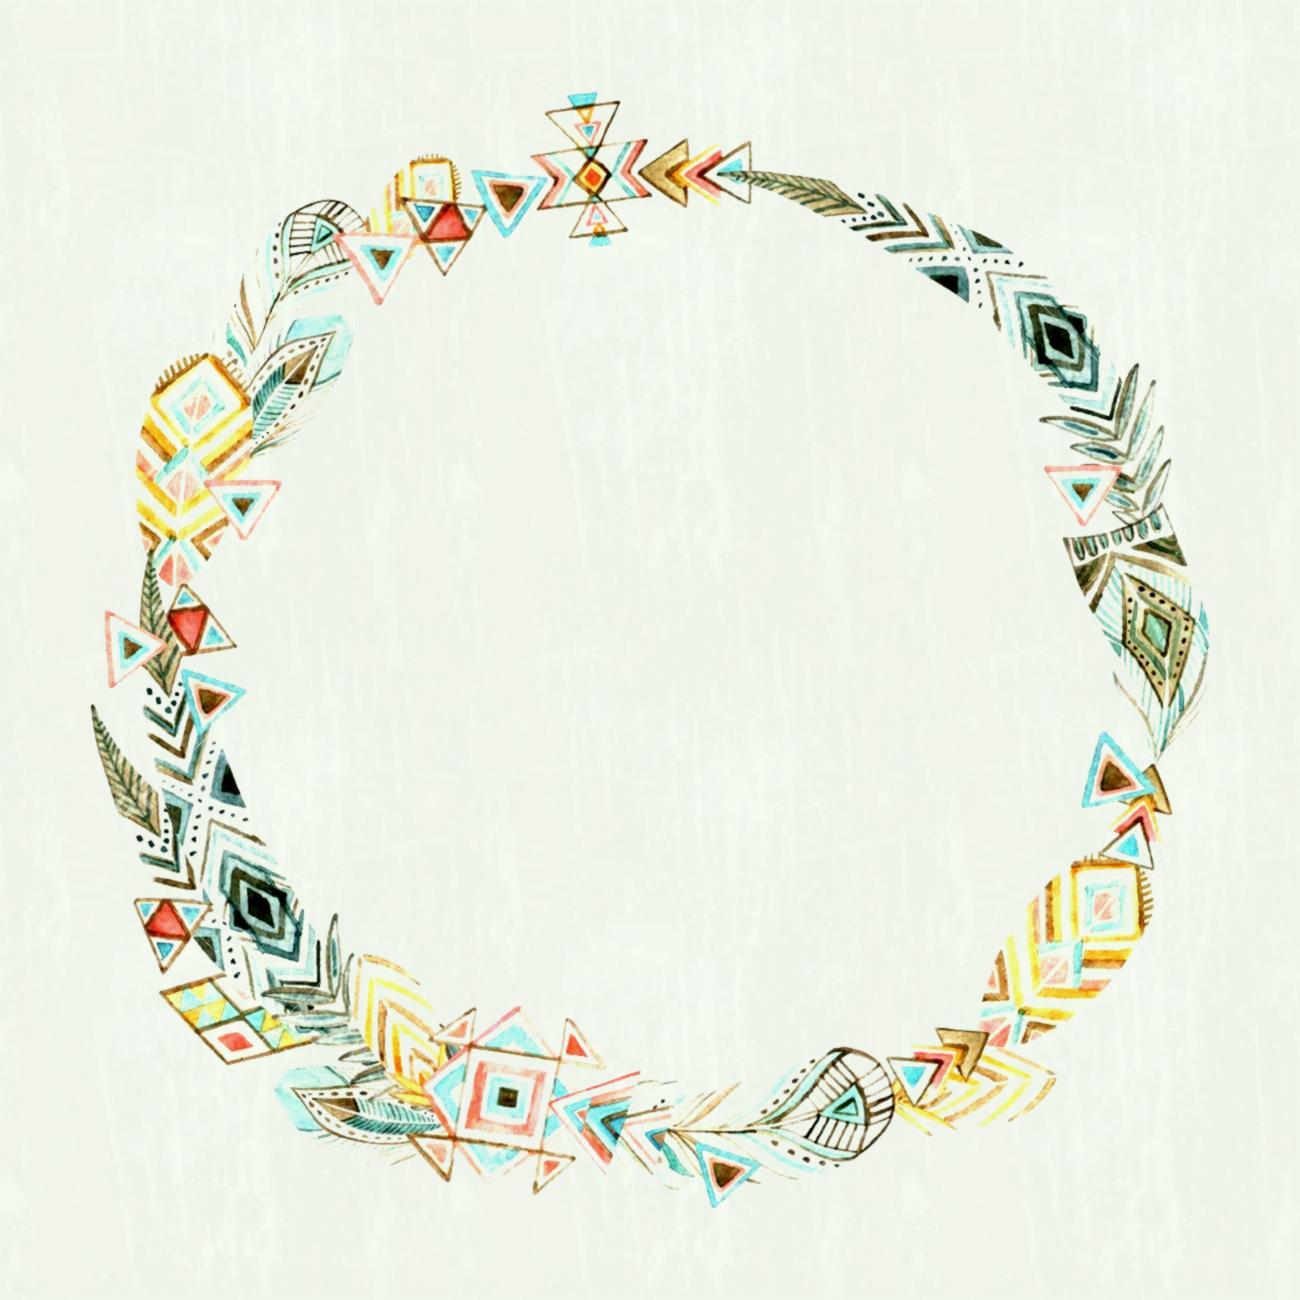 Watercolor Wreath With Geometric Feathers And Tribal Elements